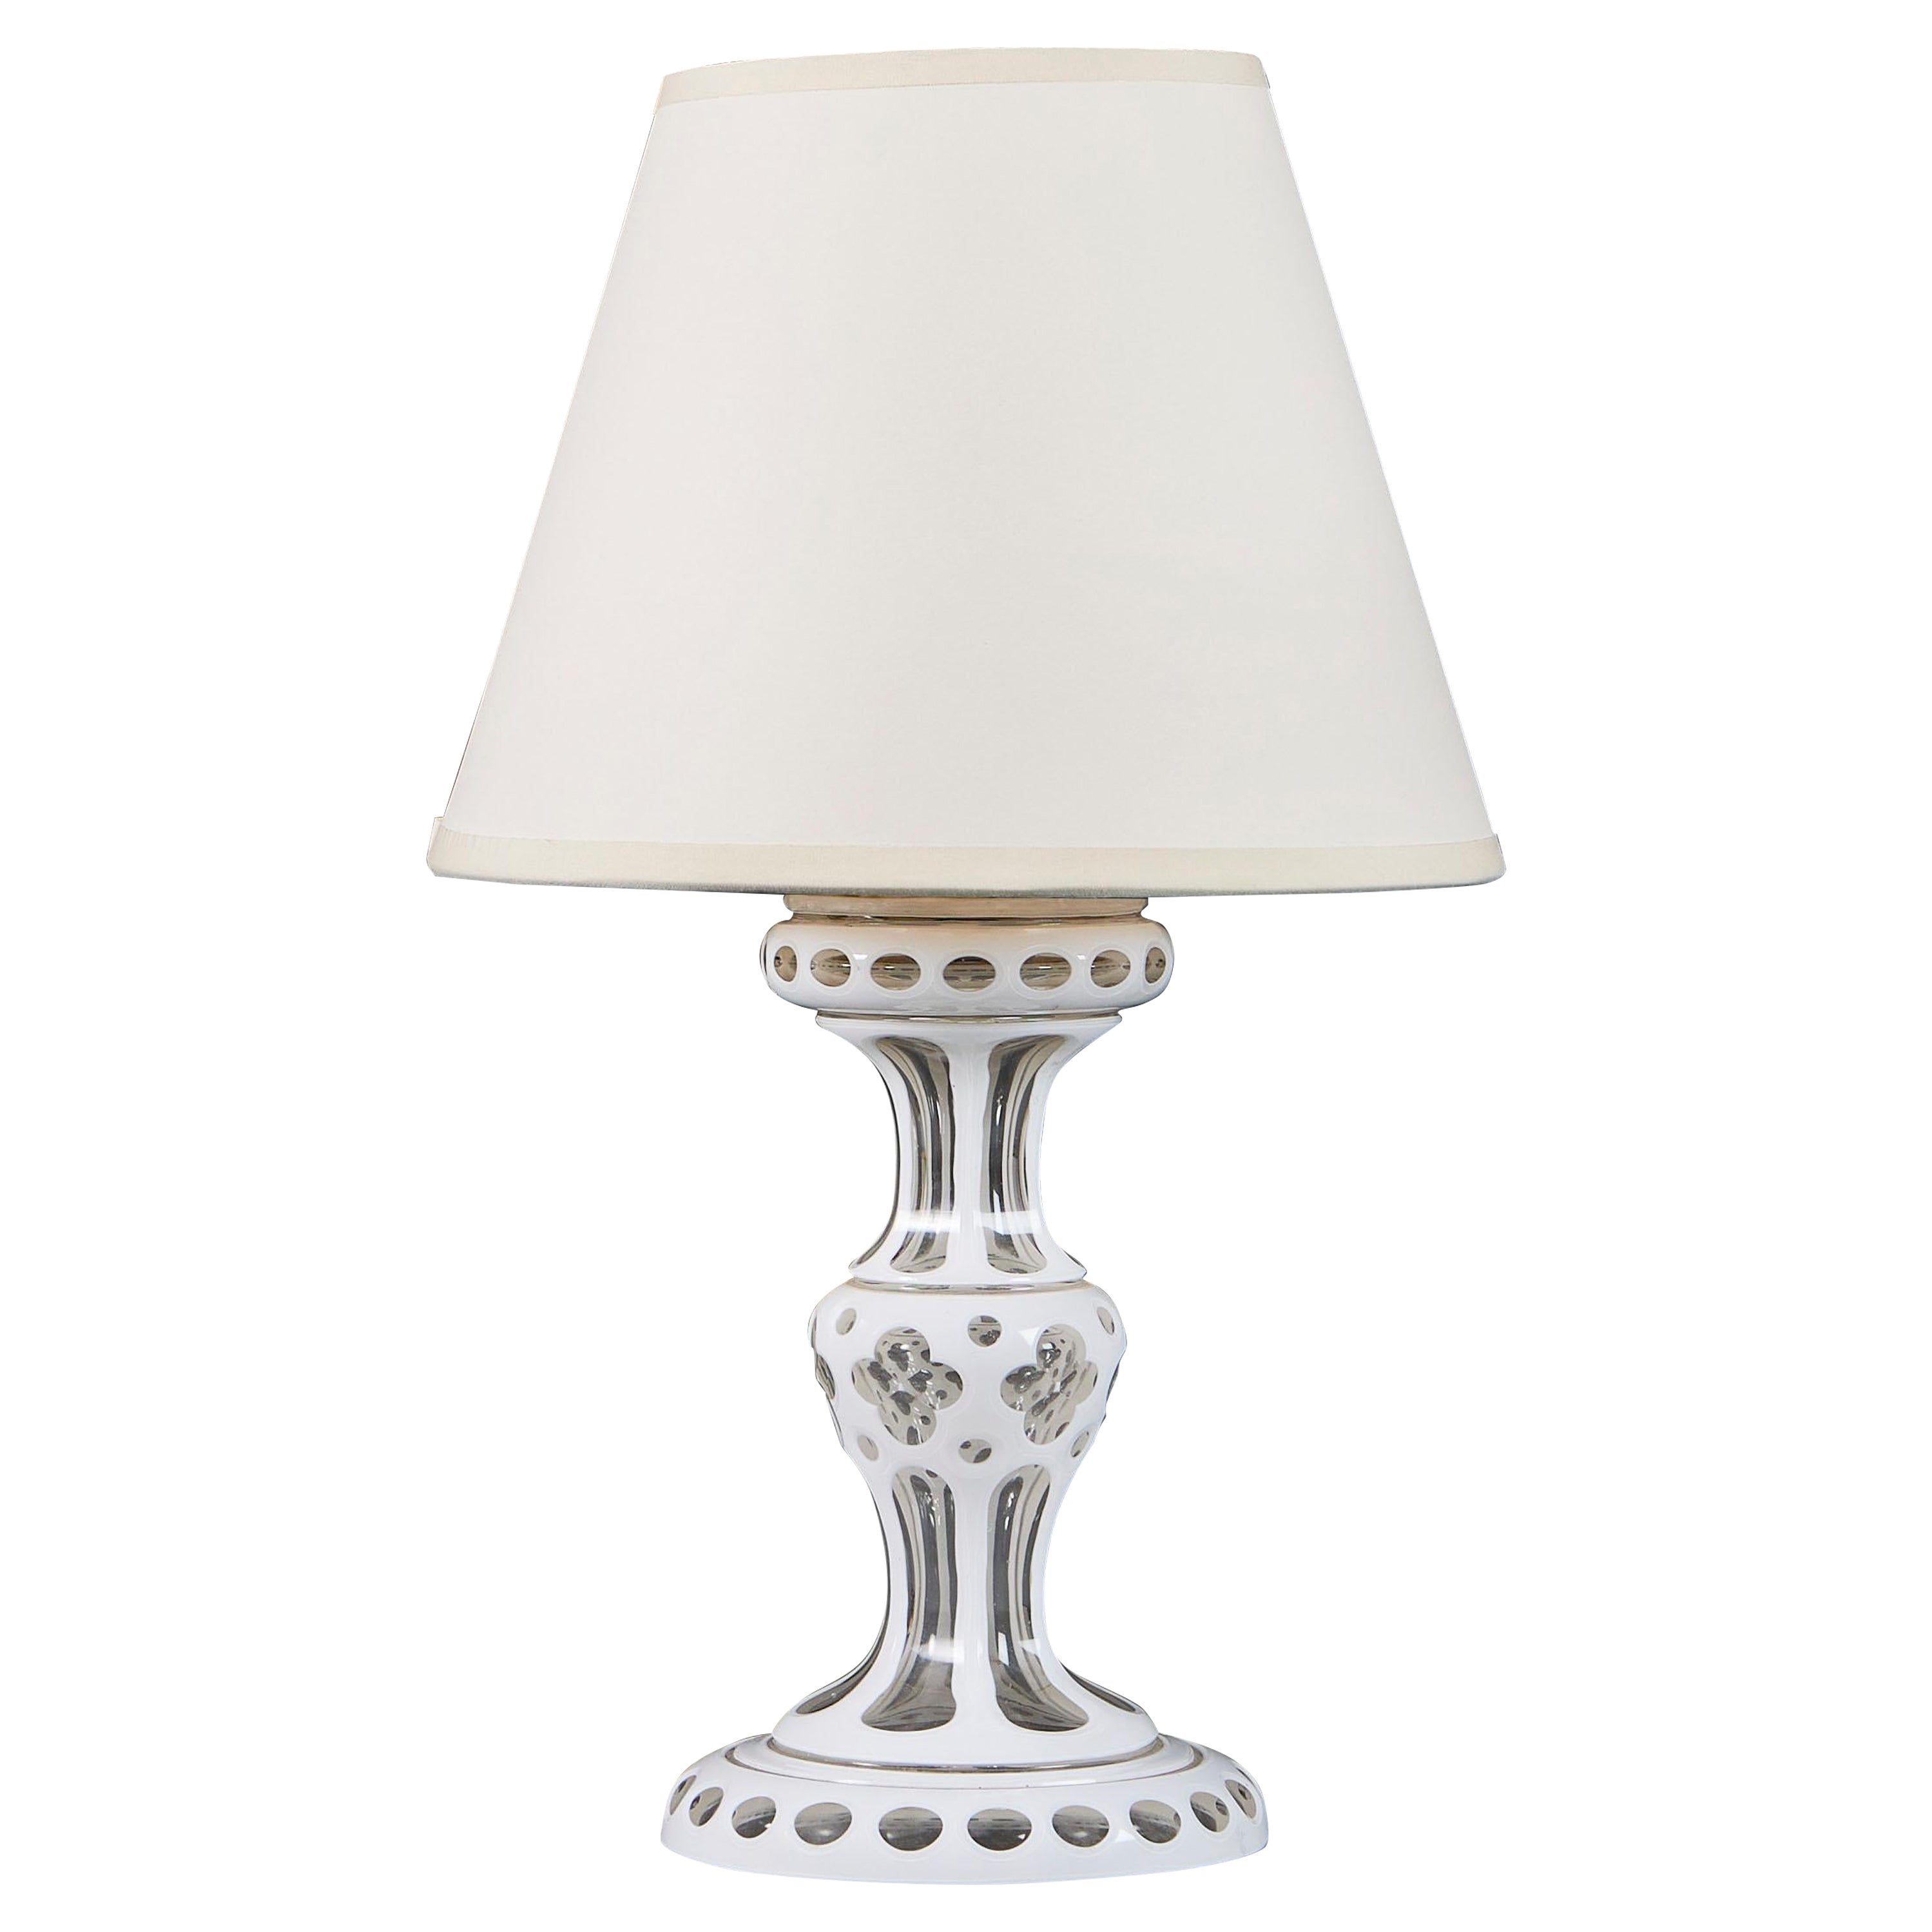 A 19th century small white cut glass table lamp For Sale